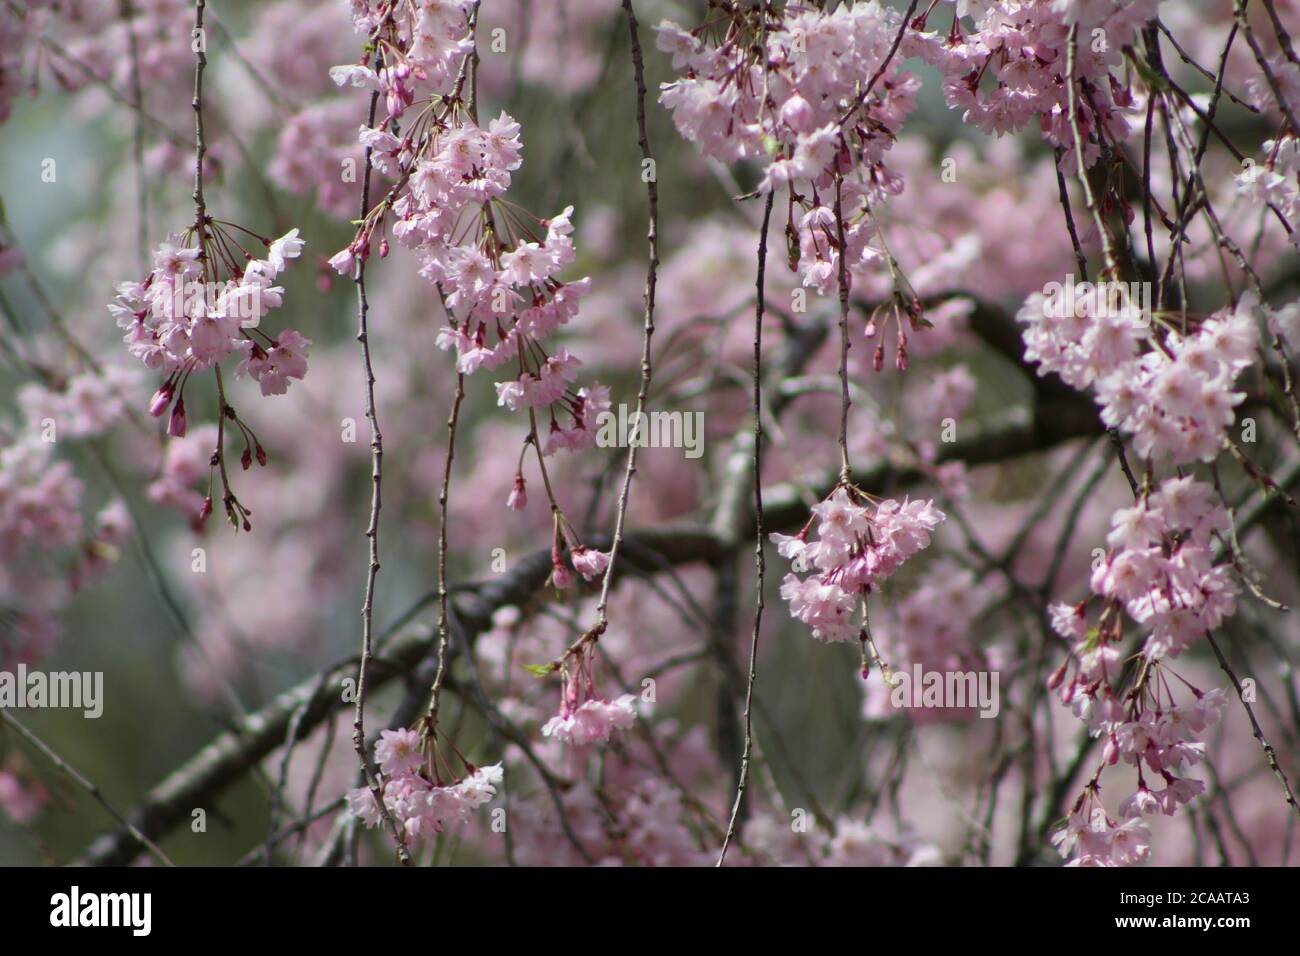 Flowers on a tree that are hanging down. Stock Photo